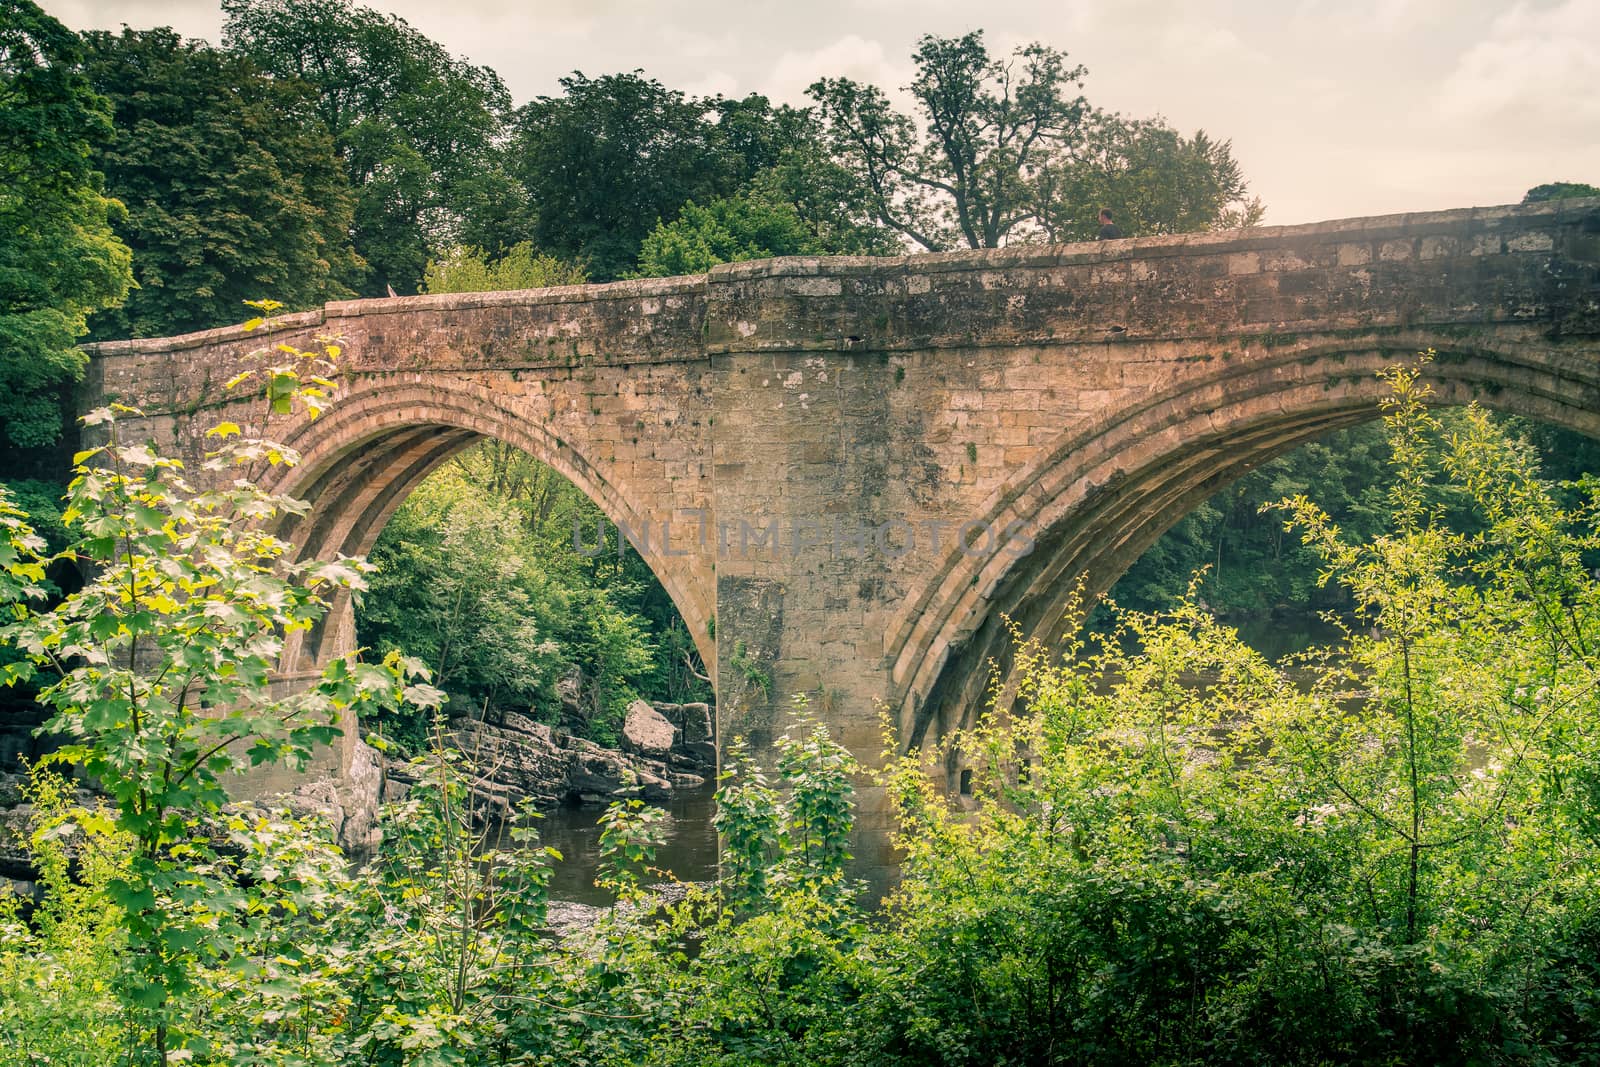 A view of Devils Bridge, a famous landmark on the river Lune near Kirkby Lonsdale, Cumbria, UK by paddythegolfer